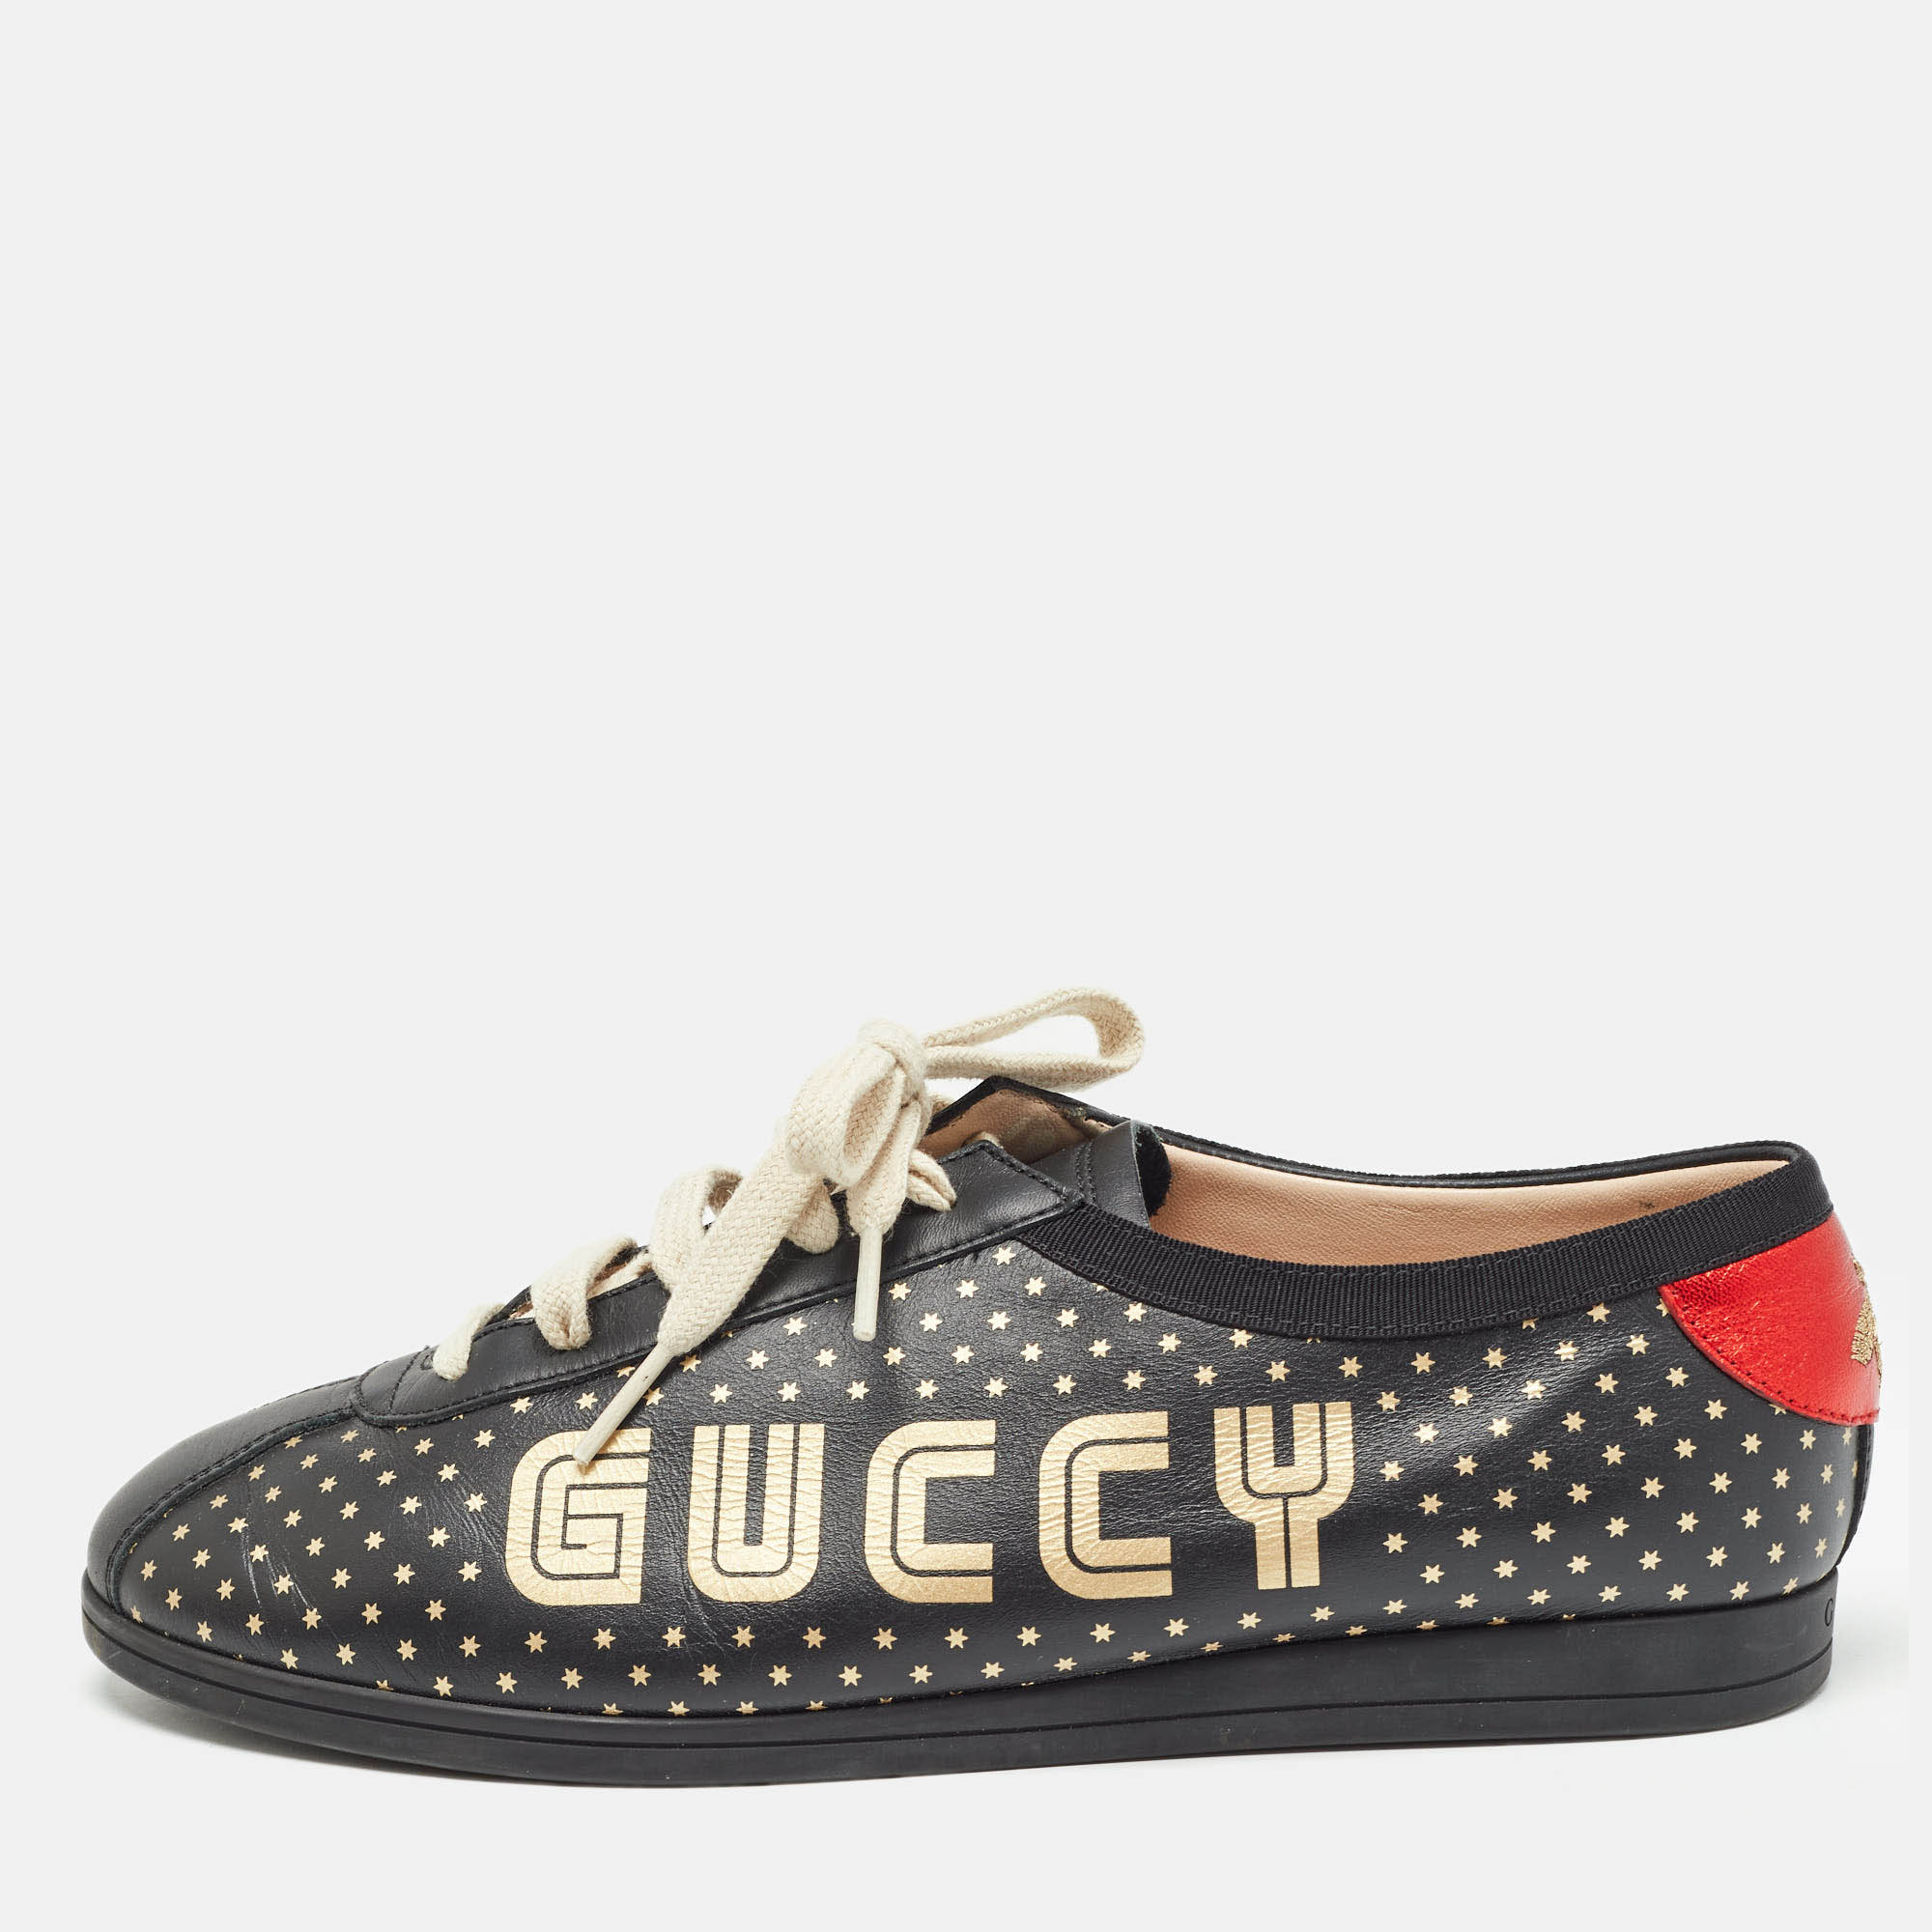 

Gucci Black Leather Guccy Stars Falacer Sneakers Size